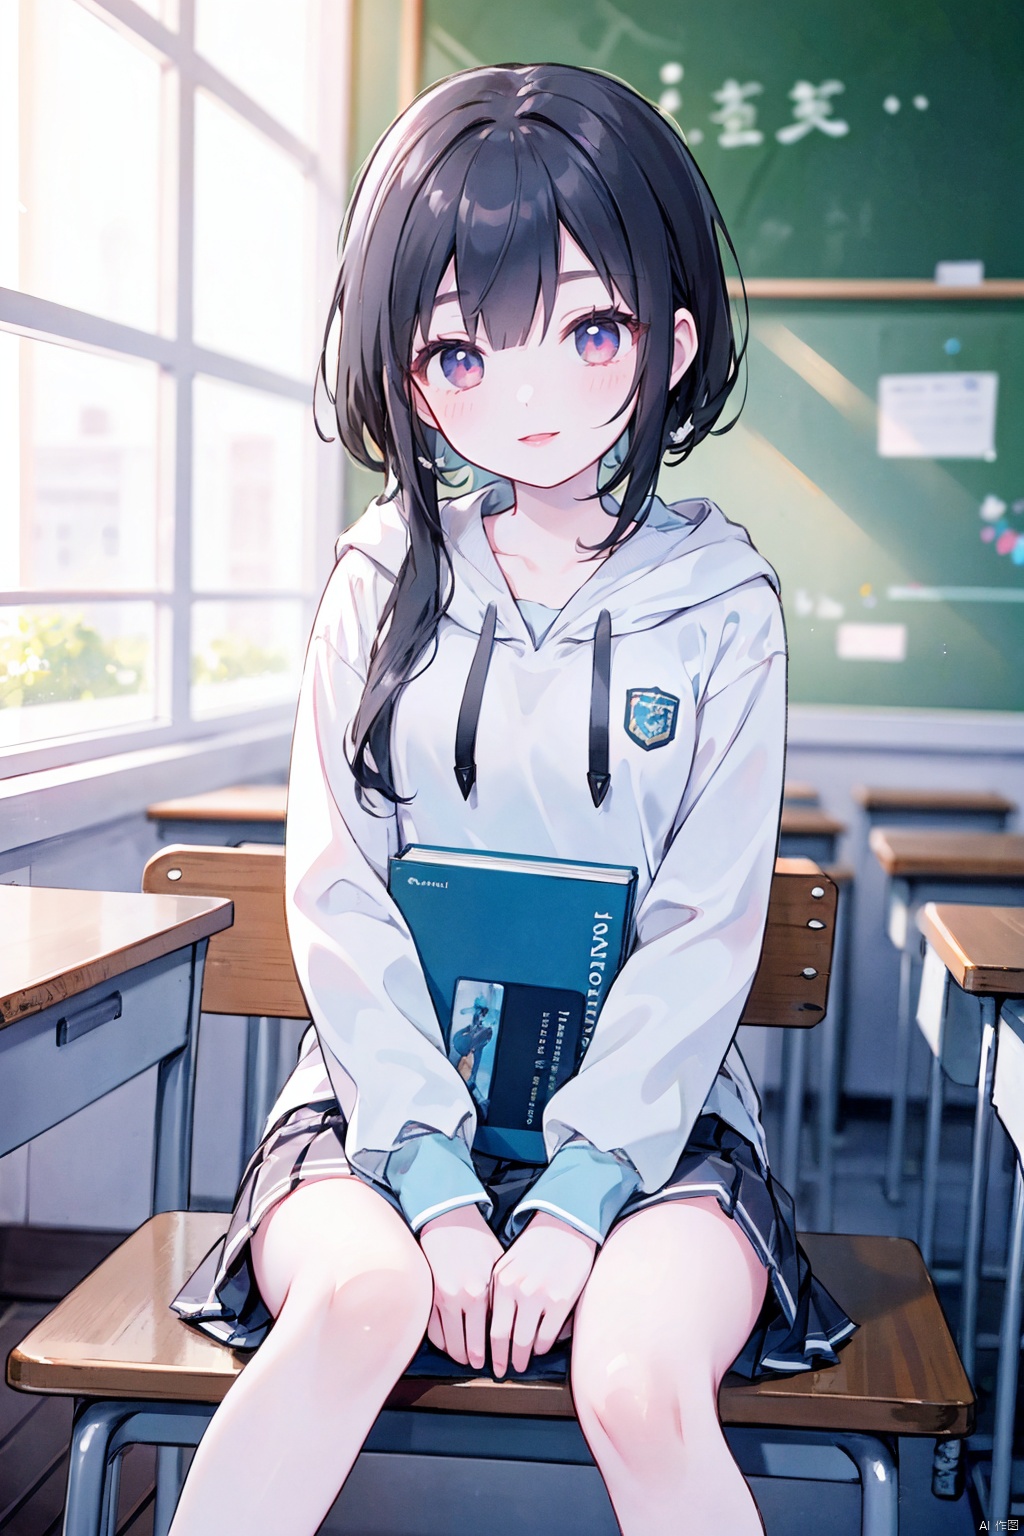  1 girl, Asian, long black hair, fuzzy, fuzzy background, color difference, depth of field, blue and white school uniform, hoodie, lips, long sleeves, looking at the audience, photo (center) , real, sitting in the classroom, blackboard, desk, book, Smile, Solo, solo, 1girl,moyou